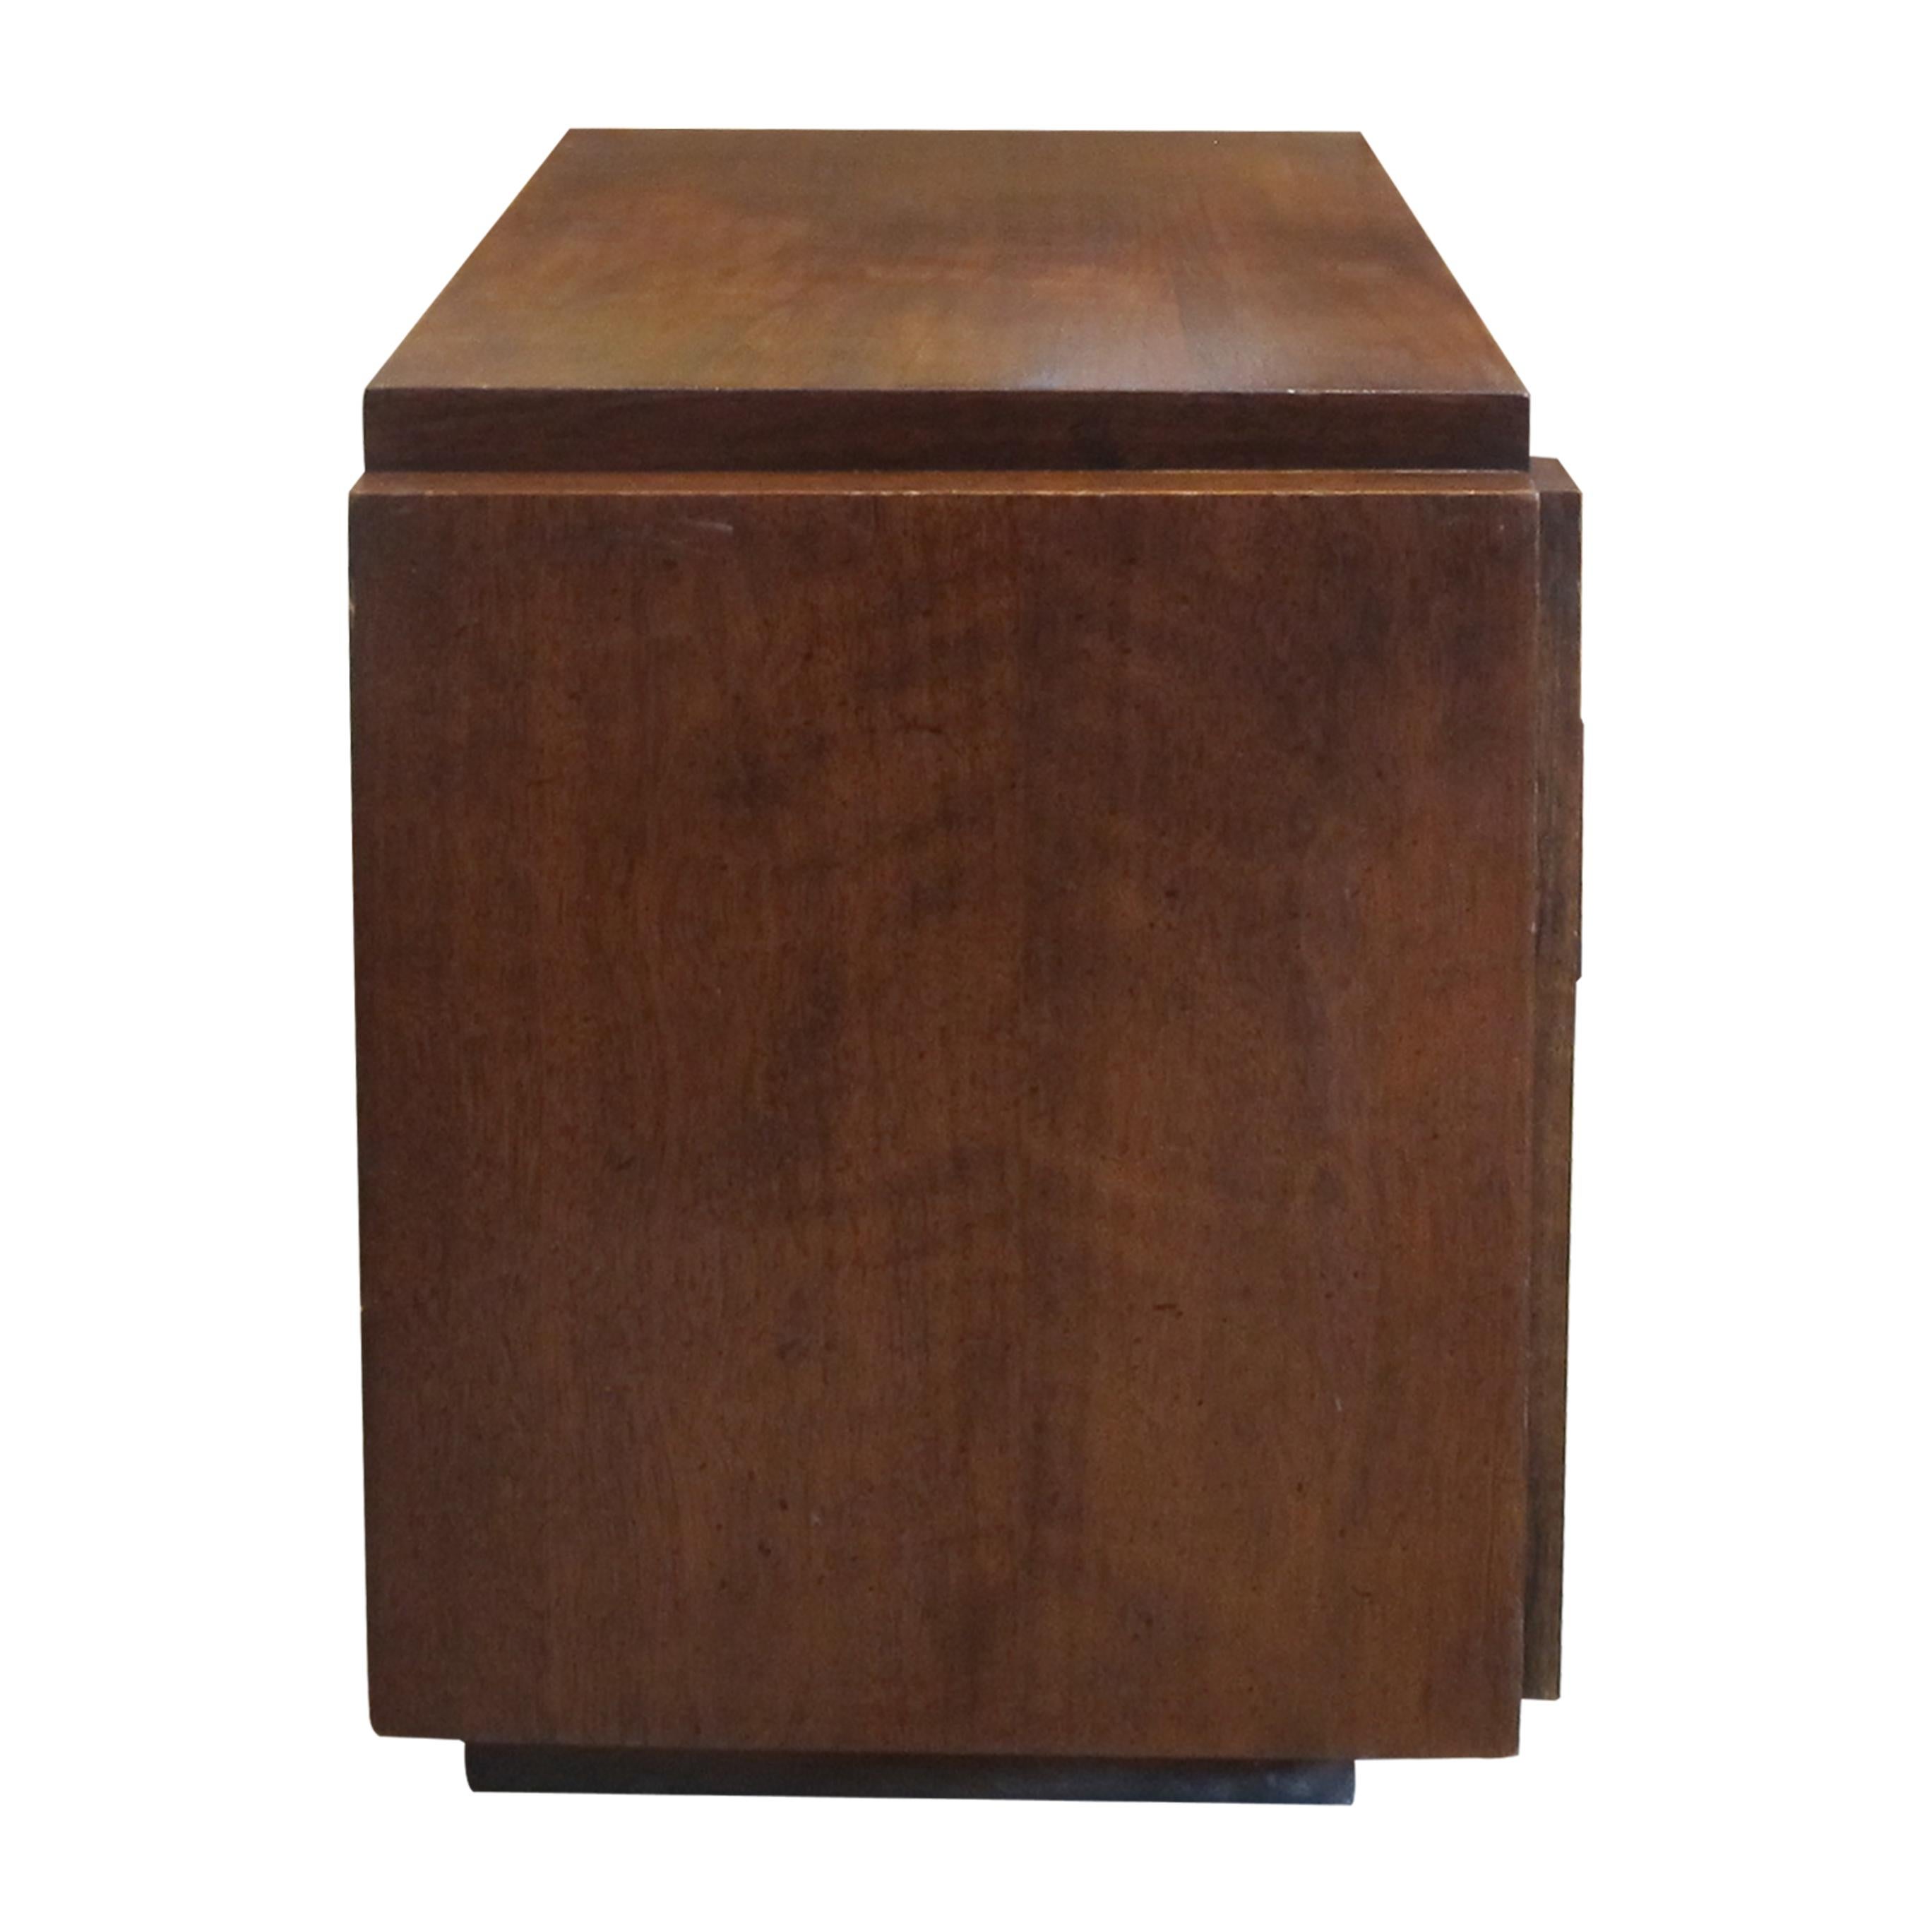 Mid-20th Century 1960s Pair of “Brutalist” Walnut Staccato Paul Evan Bedside/End Tables by Lane